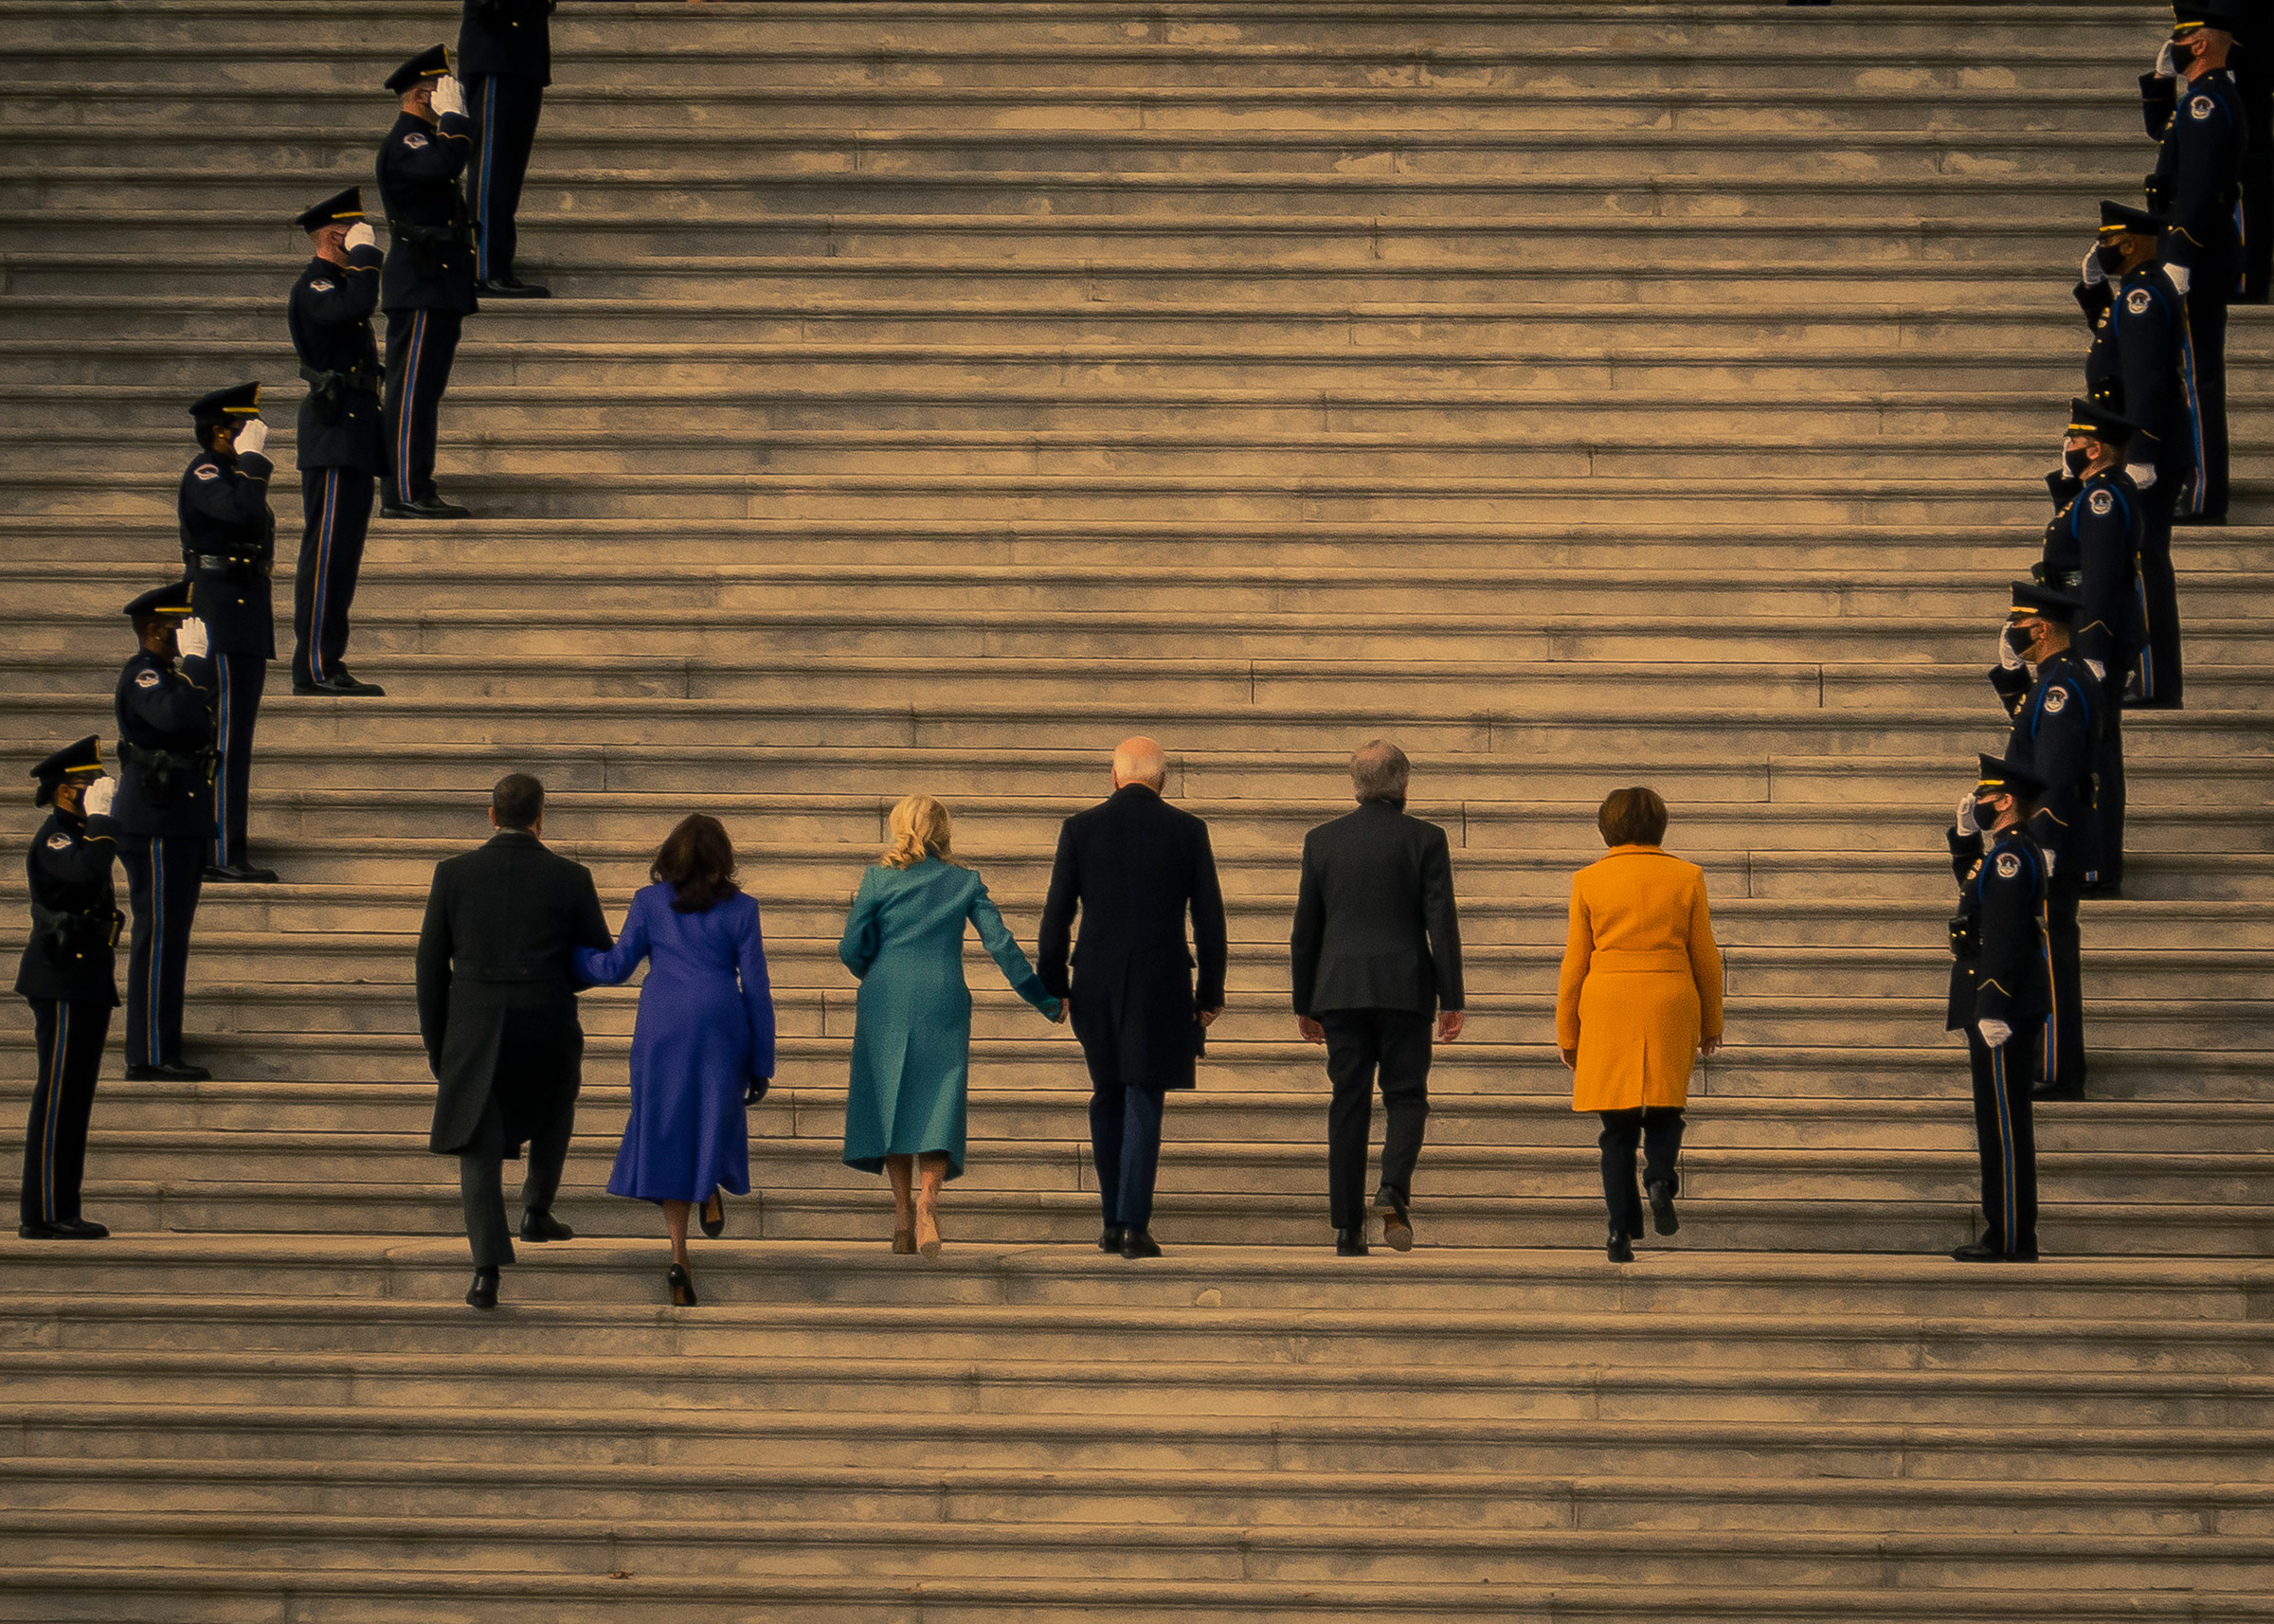 President-elect Joe Biden and Vice President-elect Kamala Harris arrive at the East Front steps of the U.S. Capitol prior the 2021 Presidential Inauguration.